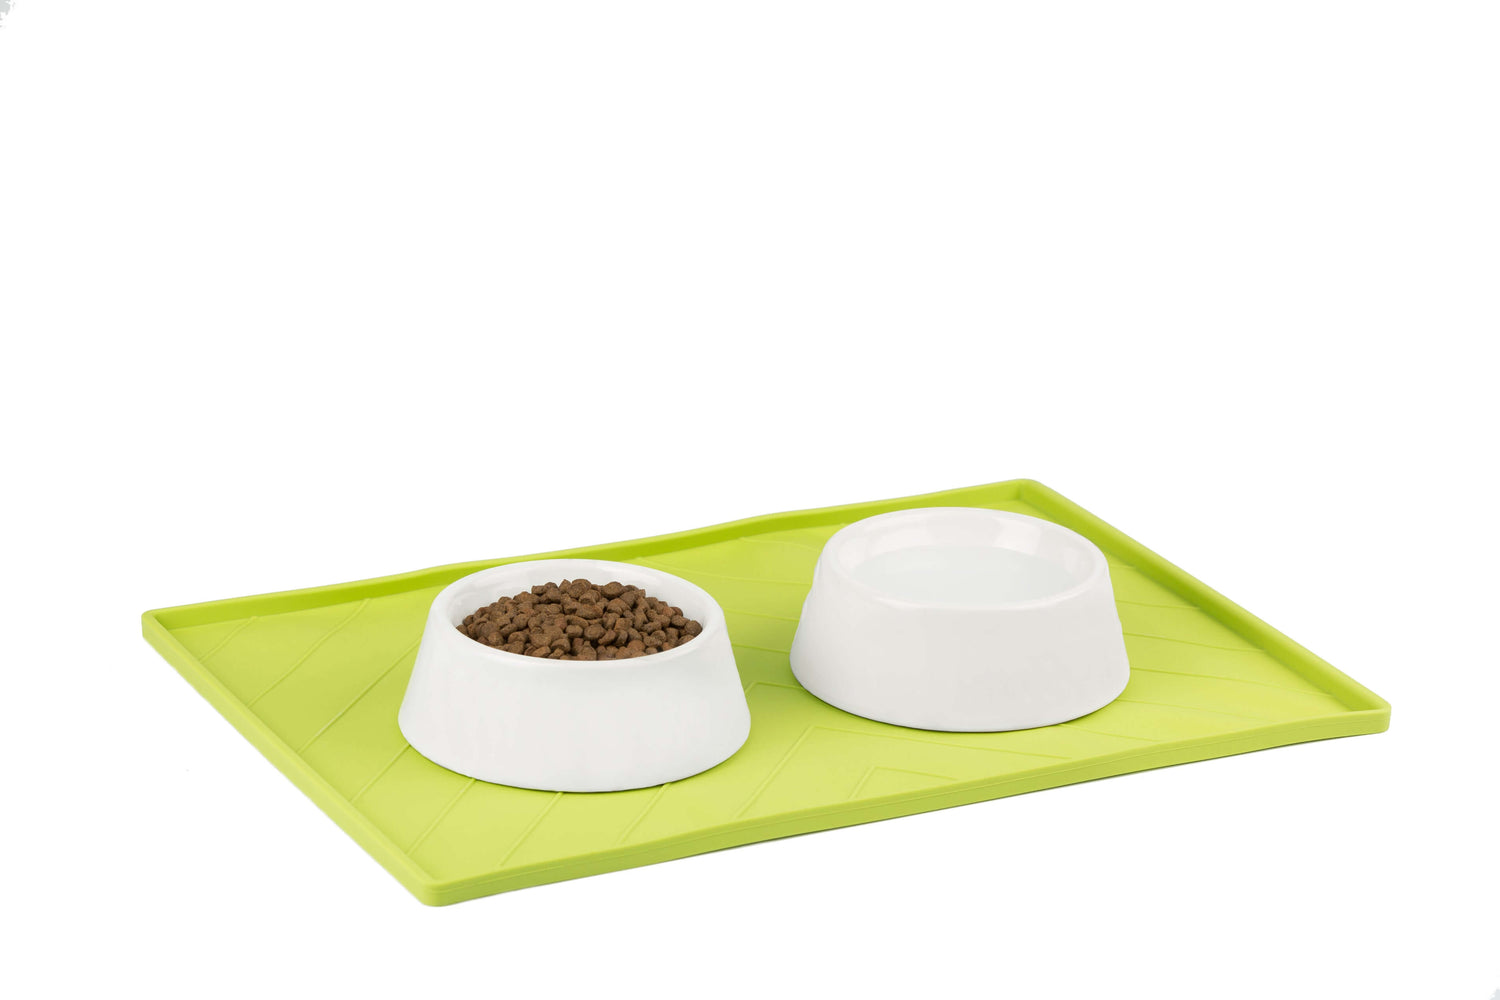 Green large pet bowl mat rolls up for easy storage. Protects your floors!